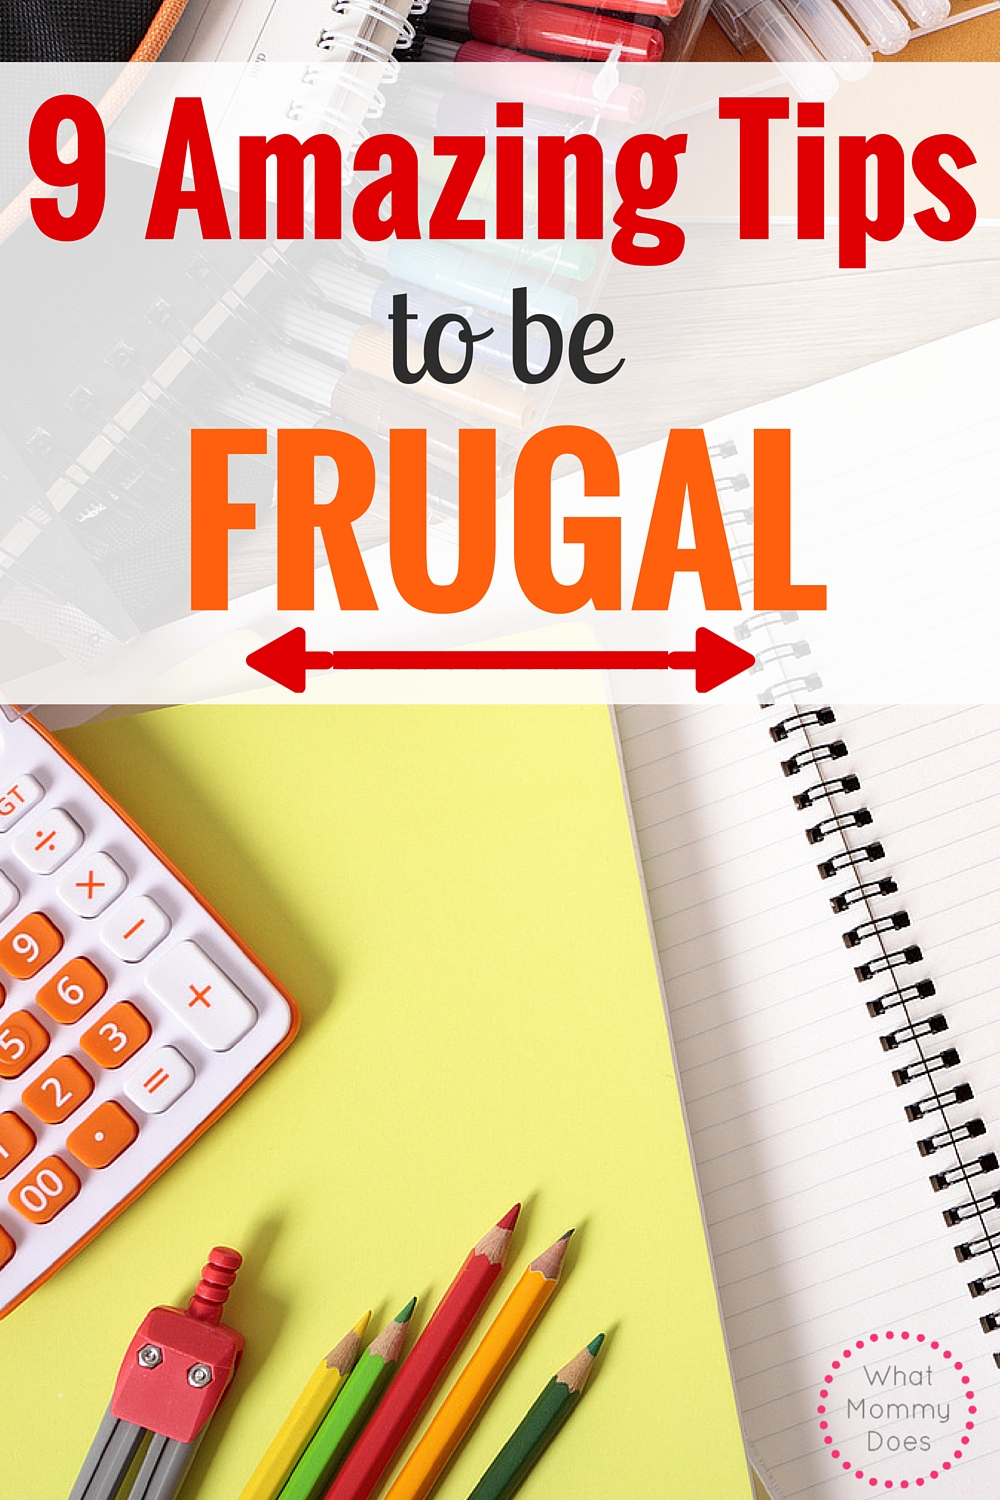 How to Be Frugal - These nine AMAZING tips to frugal living will help you save money and live happier.